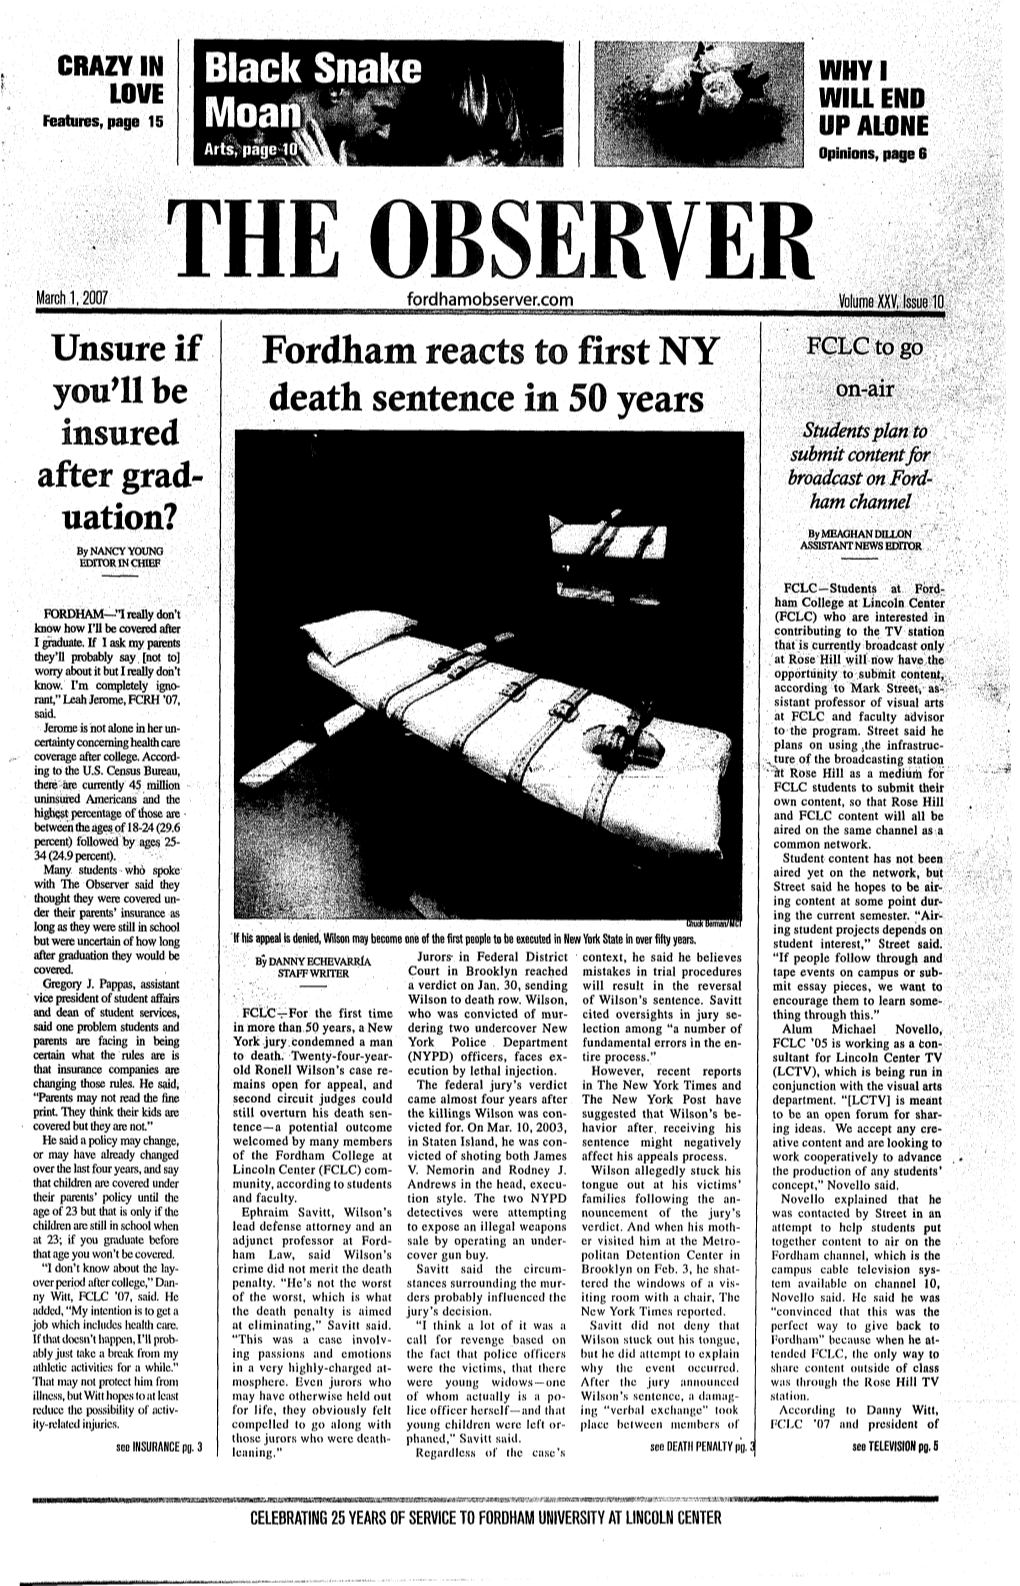 Fordham Reacts to First NY Death Sentence in 50 Years